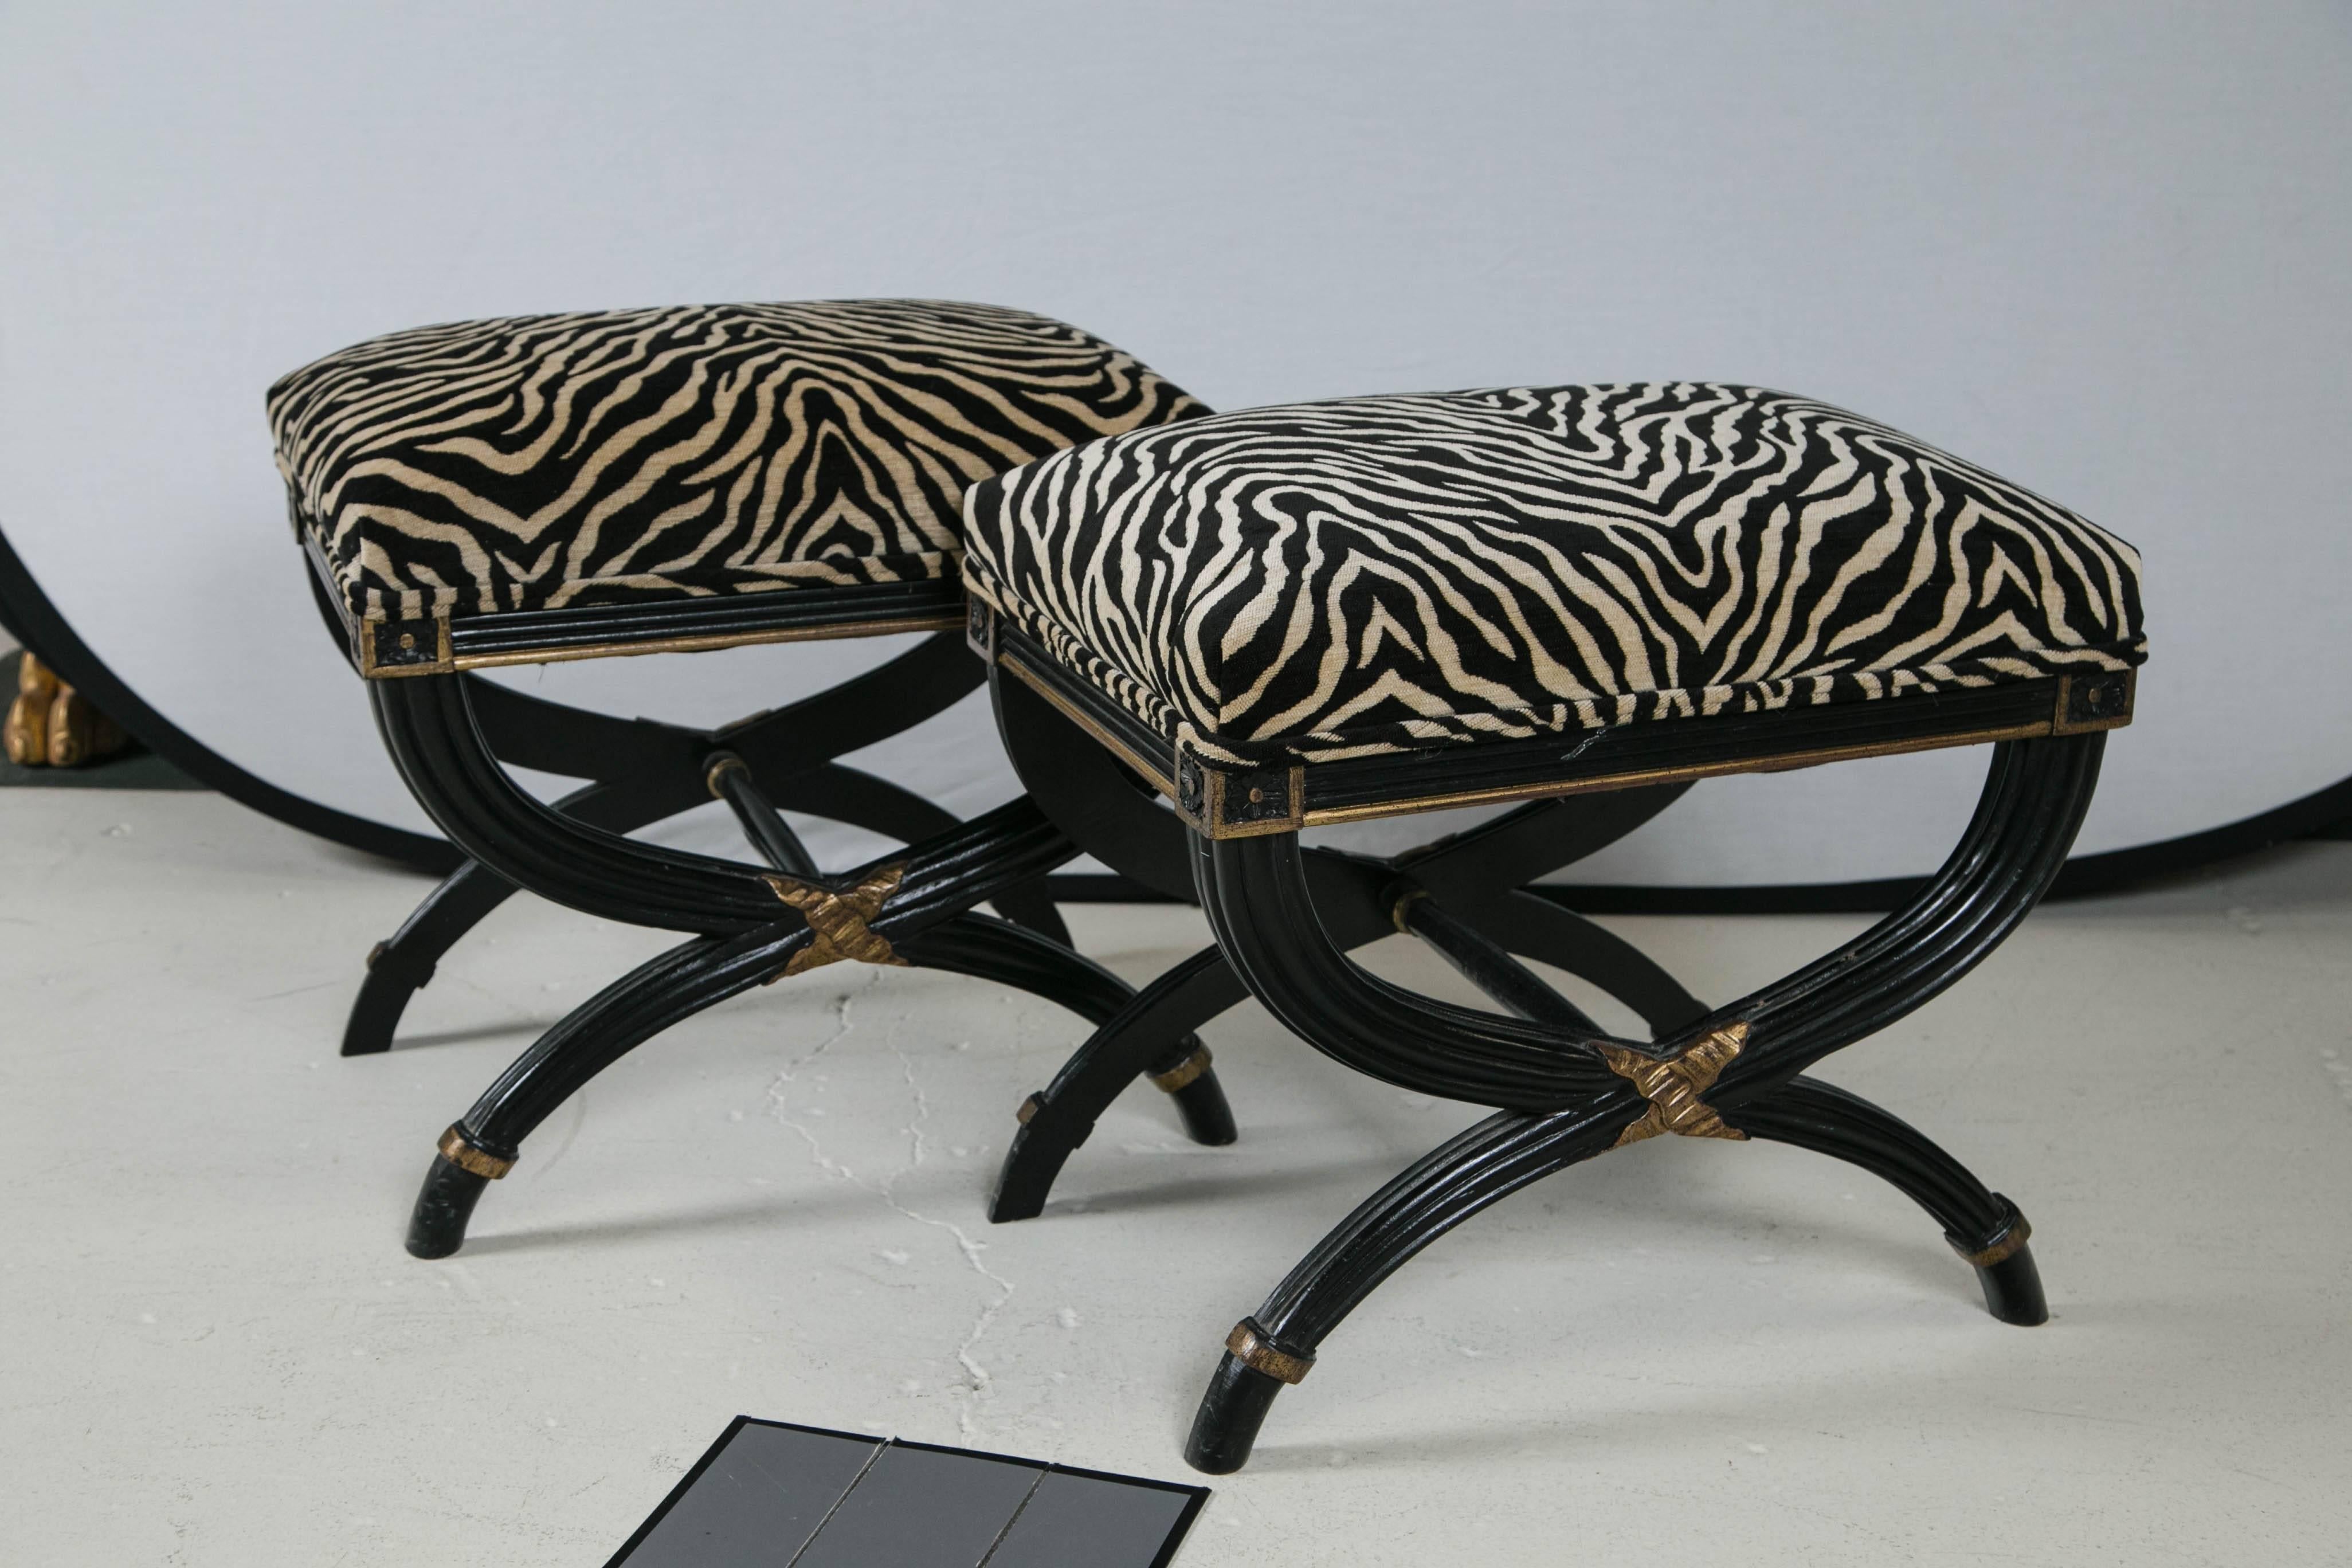 Pair of curule benches with black legs and gold leaf highlights. Newly upholstered in chenille fabric with woven zebra design.